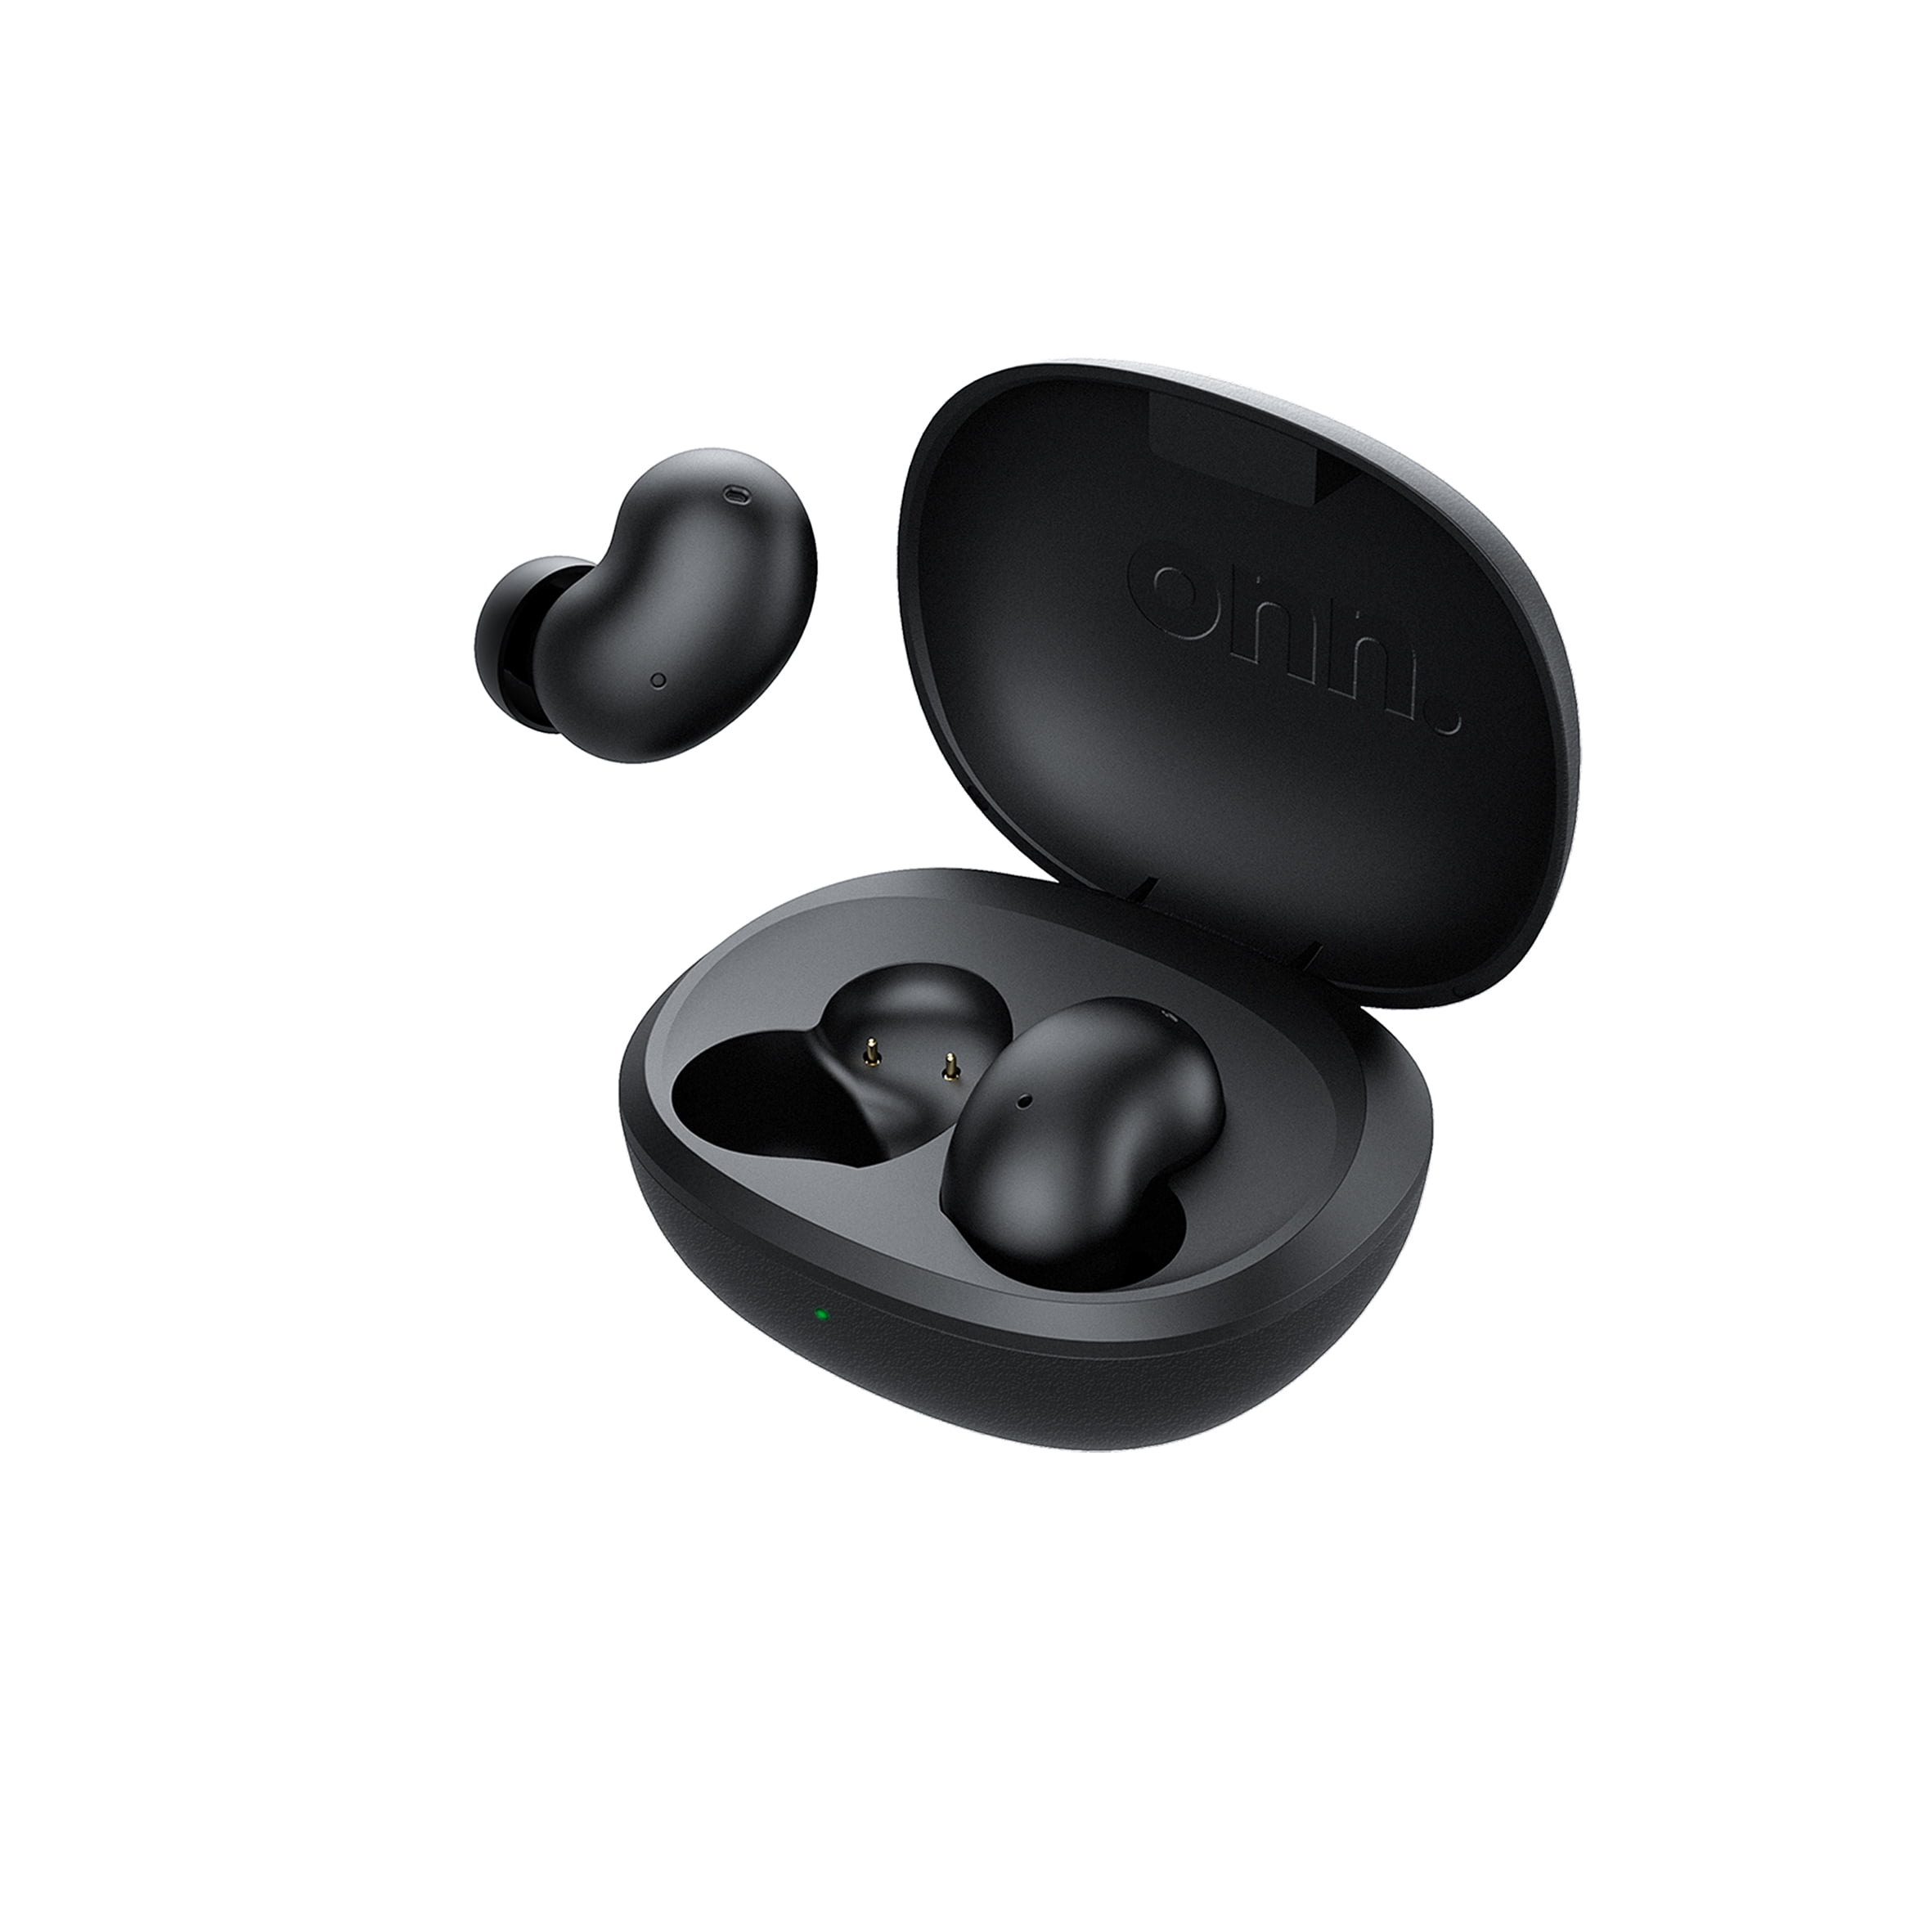 onn. Bluetooth 5.2 Active Noise Canceling and Ambient Sounds True Wireless Earbuds with Wireless Charging Case, Music Sharing, In-Ear Detection, Touch Control, Total 24H Playtime Headphones, Black